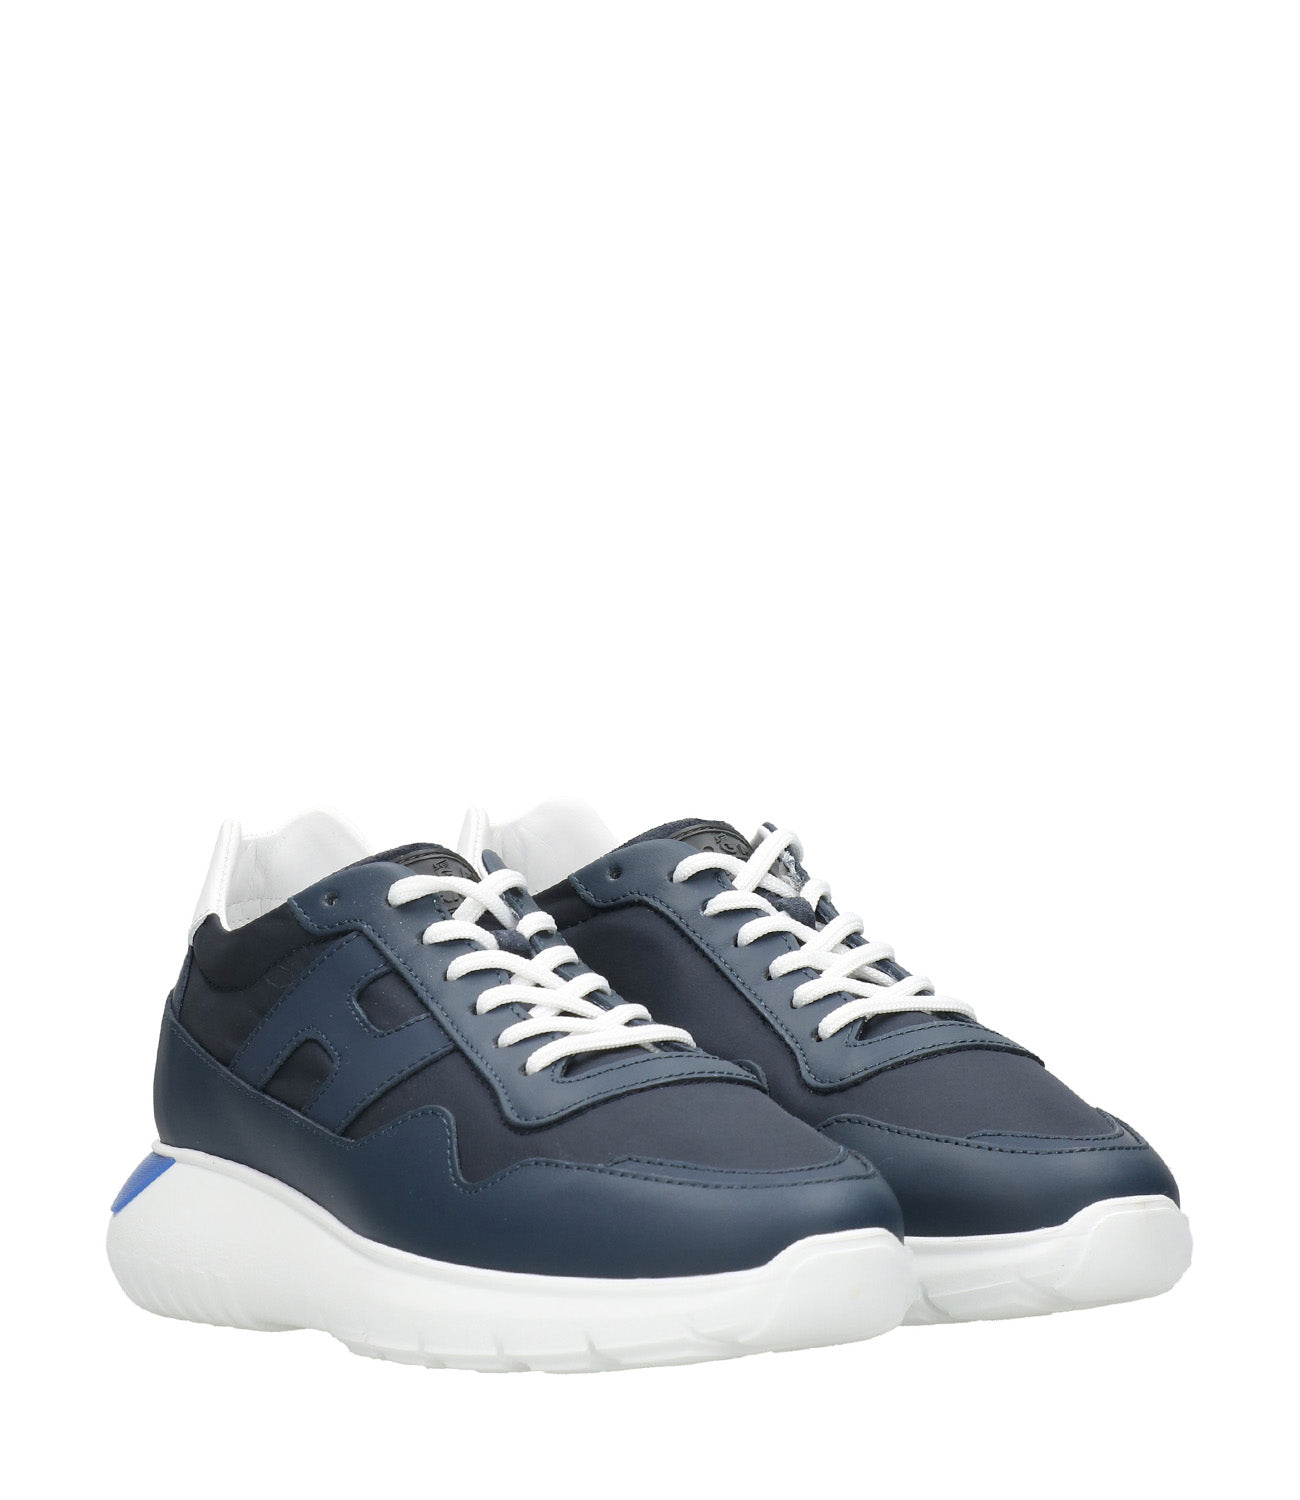 Hogan | Sneakers Interactive 3 Navy Blue and White